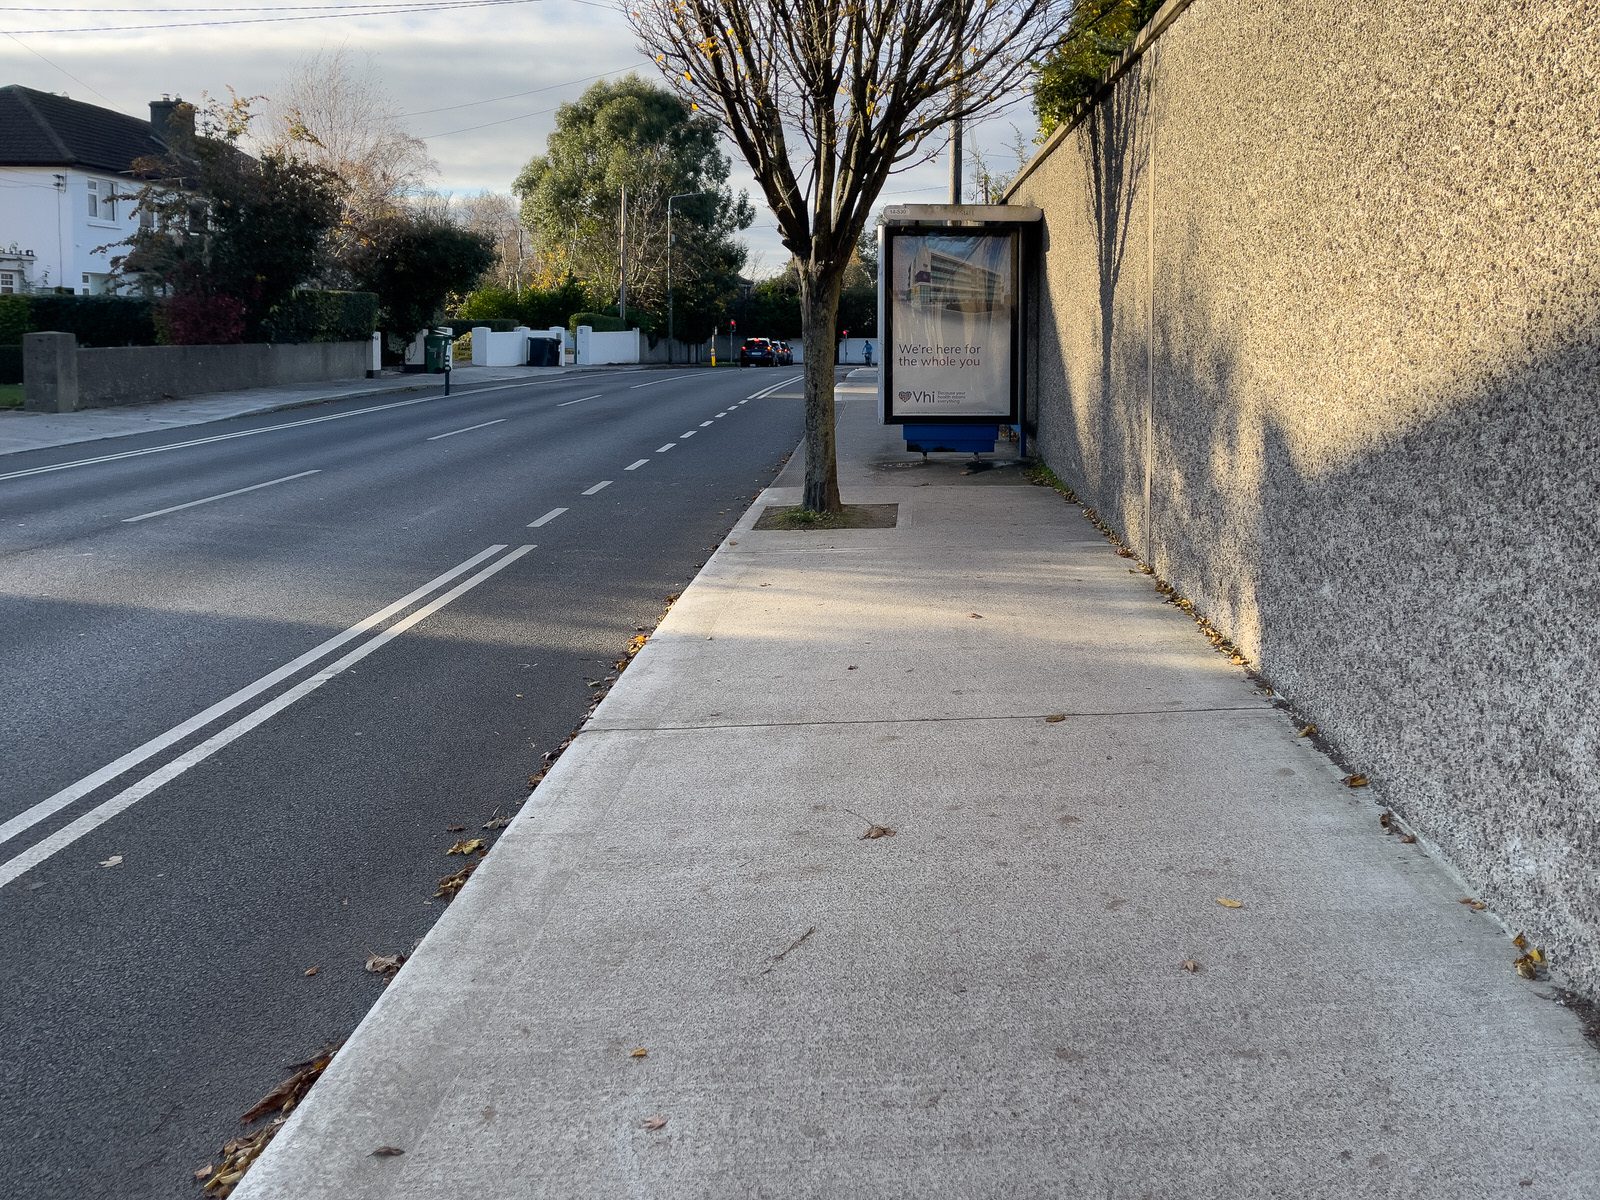 MY FIRST DAY WITHOUT THE 17 BUS SERVICE [WALK FROM S4 BUS STOP IN UCD TO ROEBUCK ROAD]-225597-1